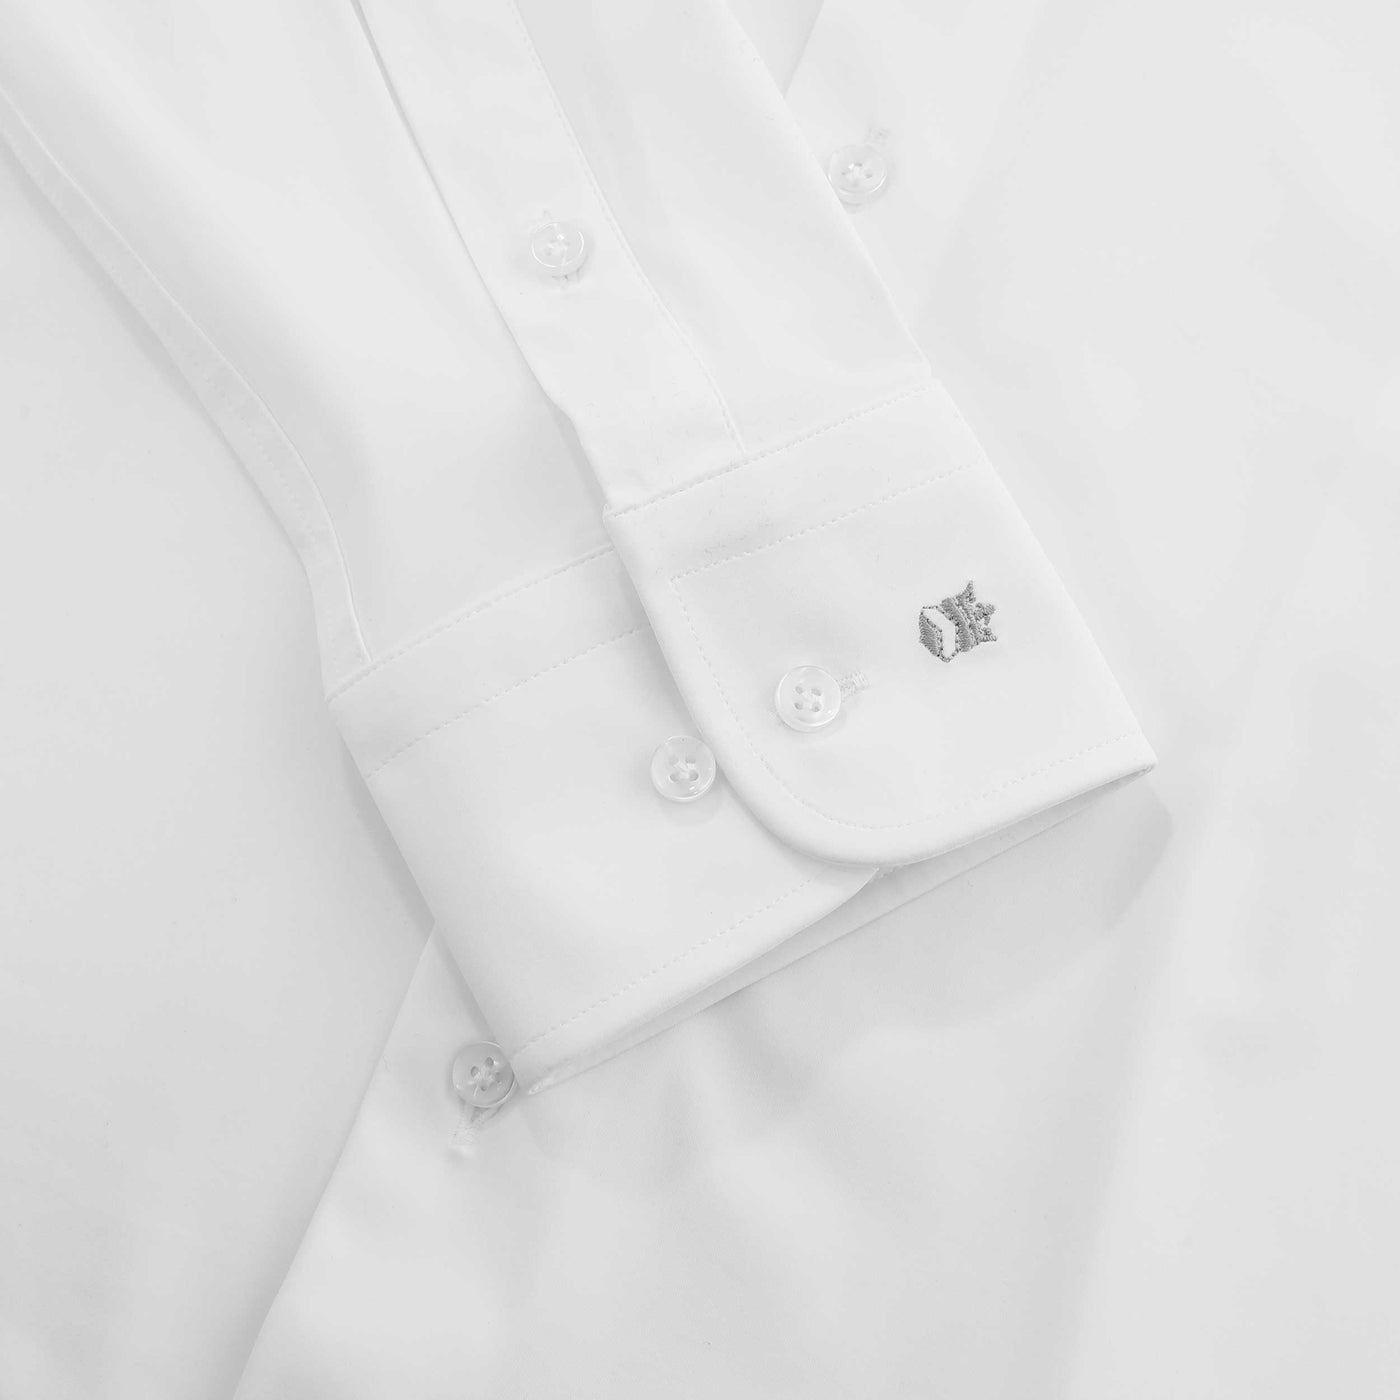 Thomas Maine Tech Luxe Stretch Shirt in White Cuff